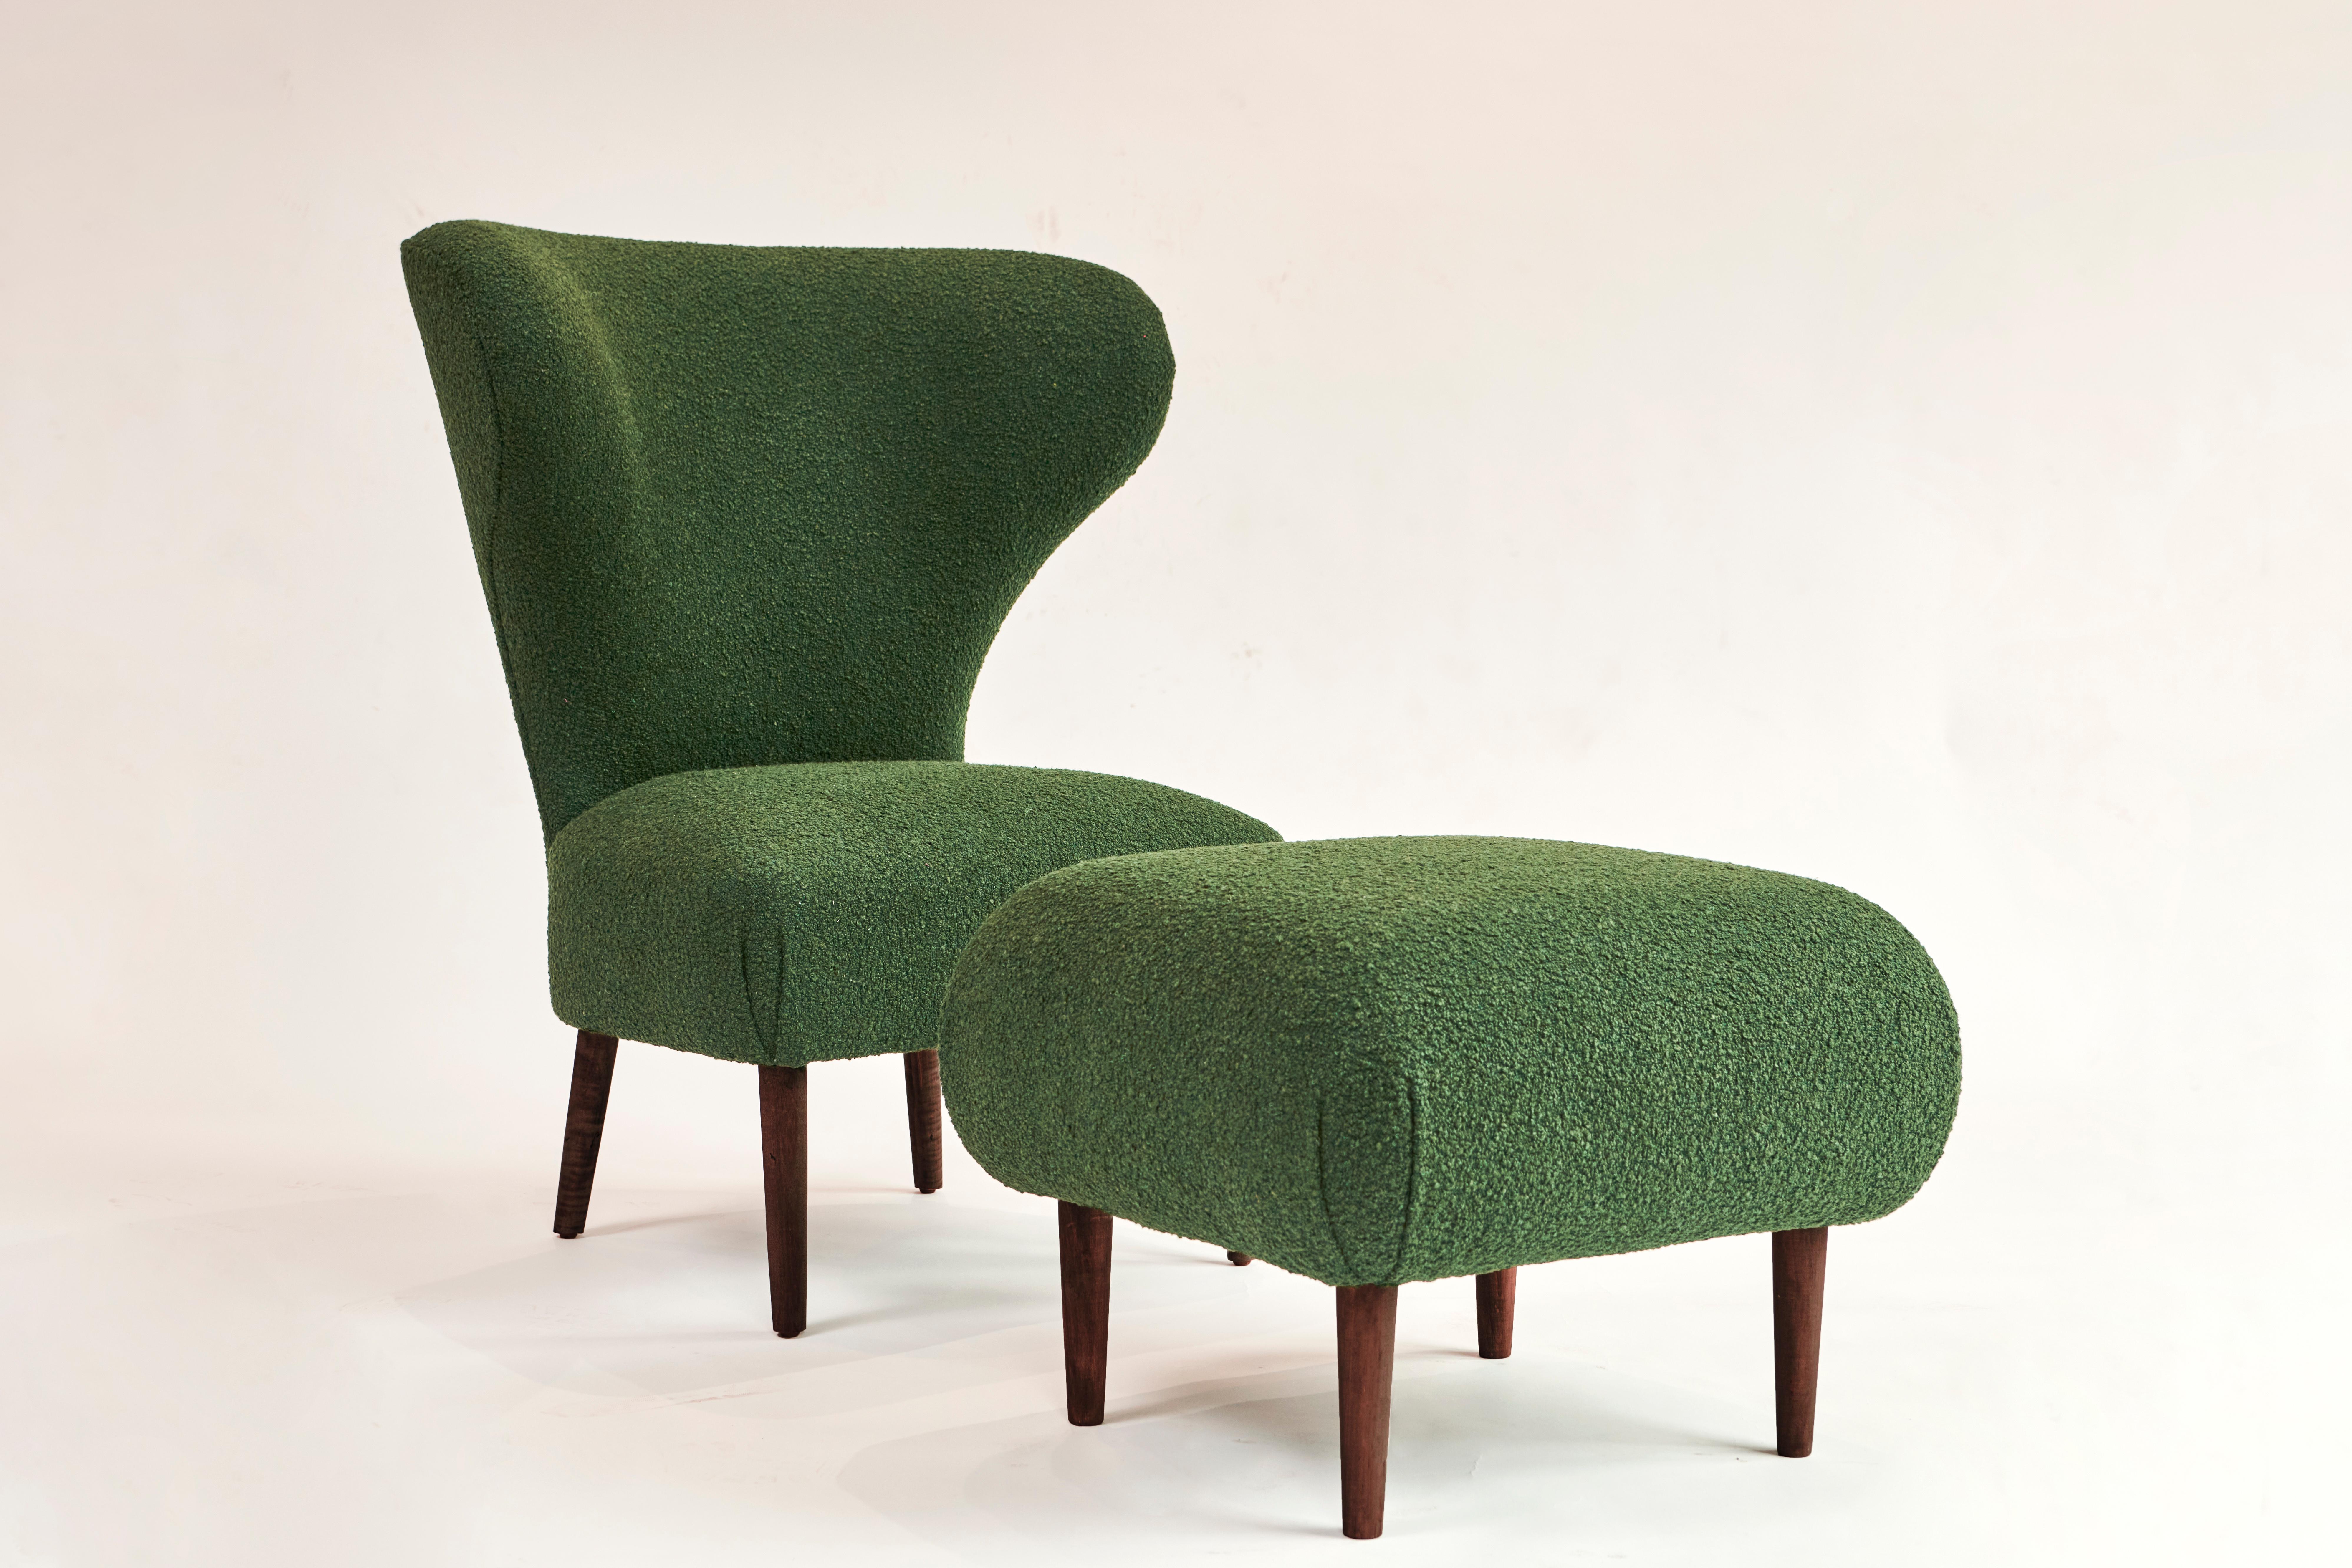 Made to order green boucle and stained maple base chair and ottoman set designed by Christian Siriano.

Fabric: Forest Green Boucle  (available in custom fabric)
Base: Stained Maple  (available in custom finish)

Chair
Seat Width: 26”
Back Width: